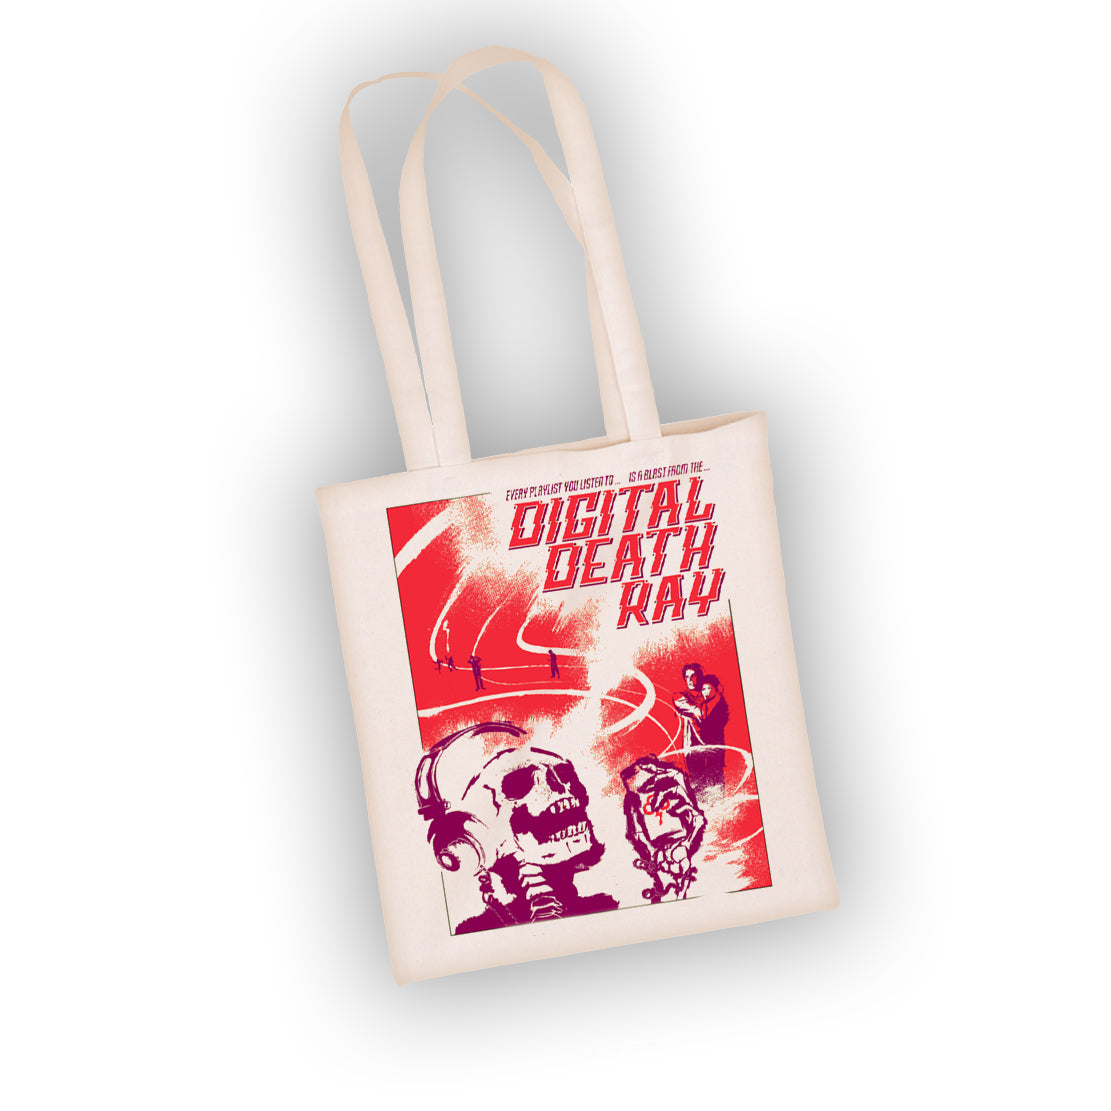 Clouds Hill 'Hidden Speculations' - DIGITAL DEATH RAY (Natural) Tote Bag